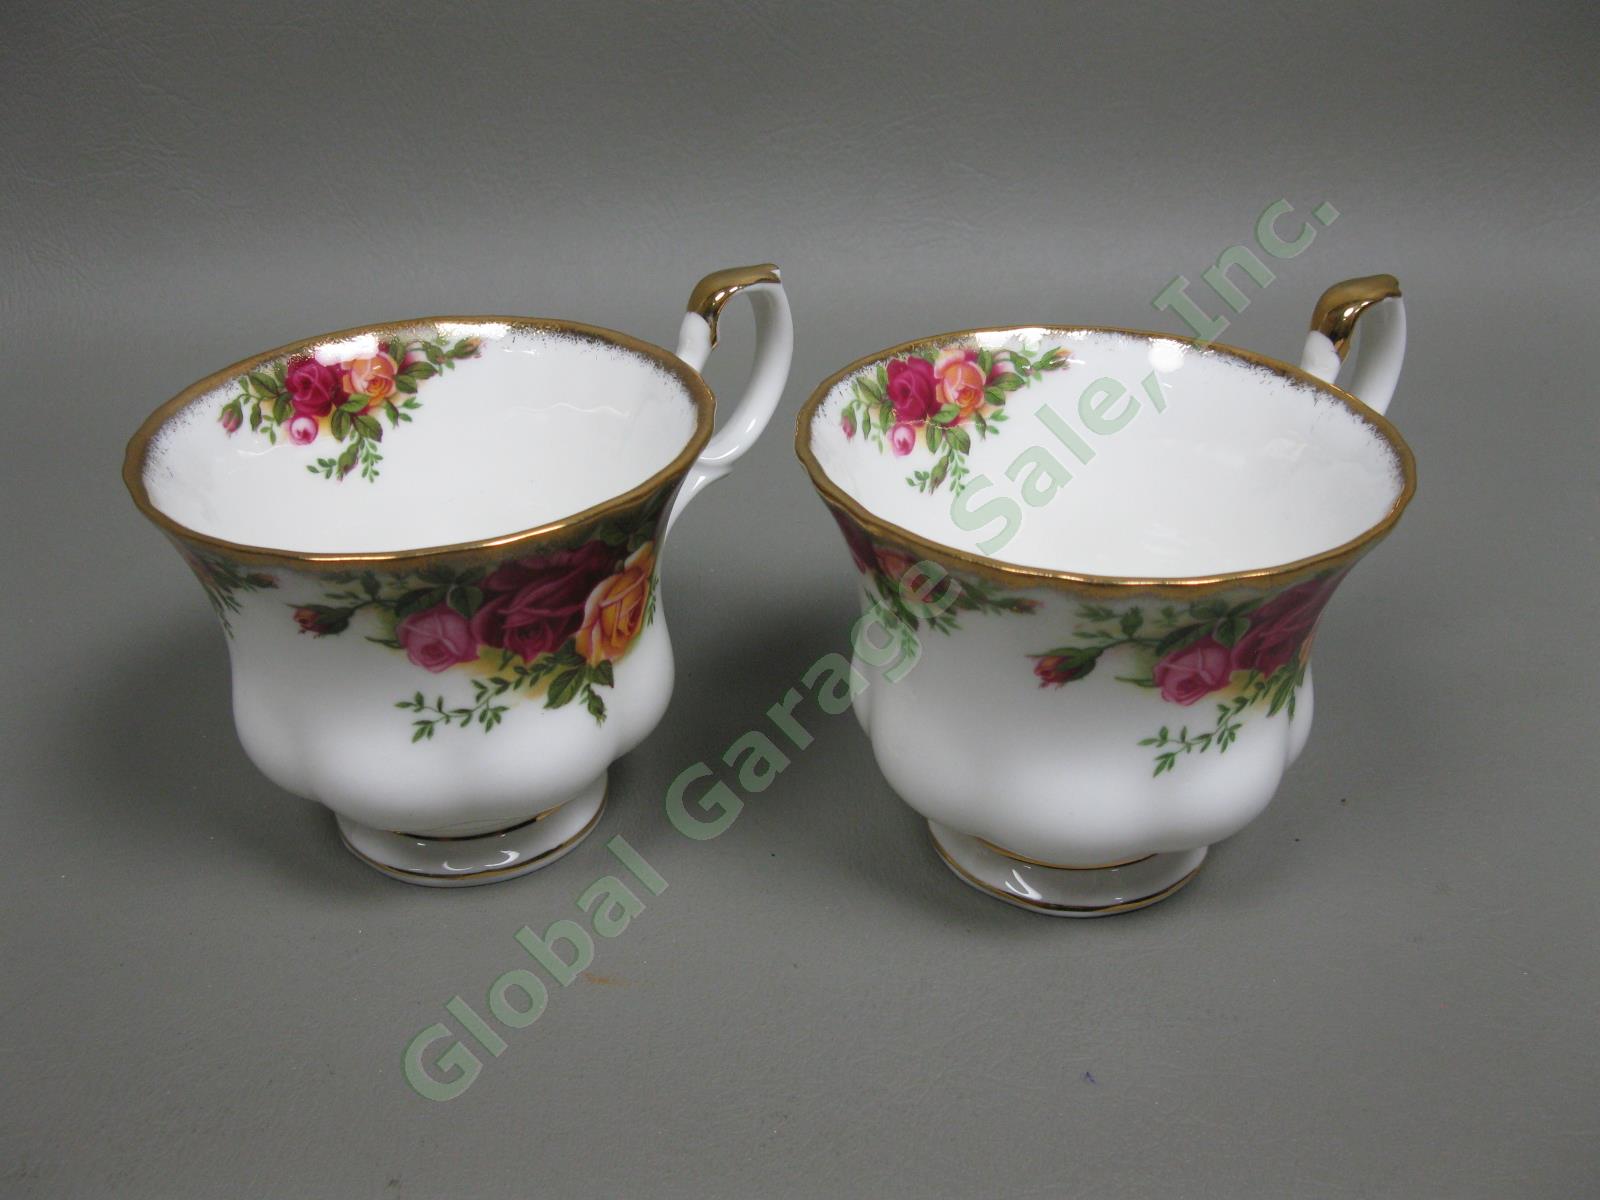 8 Royal Albert Old Country Roses Footed Tea Cup/Saucer Gold Trim Bone China Set 11